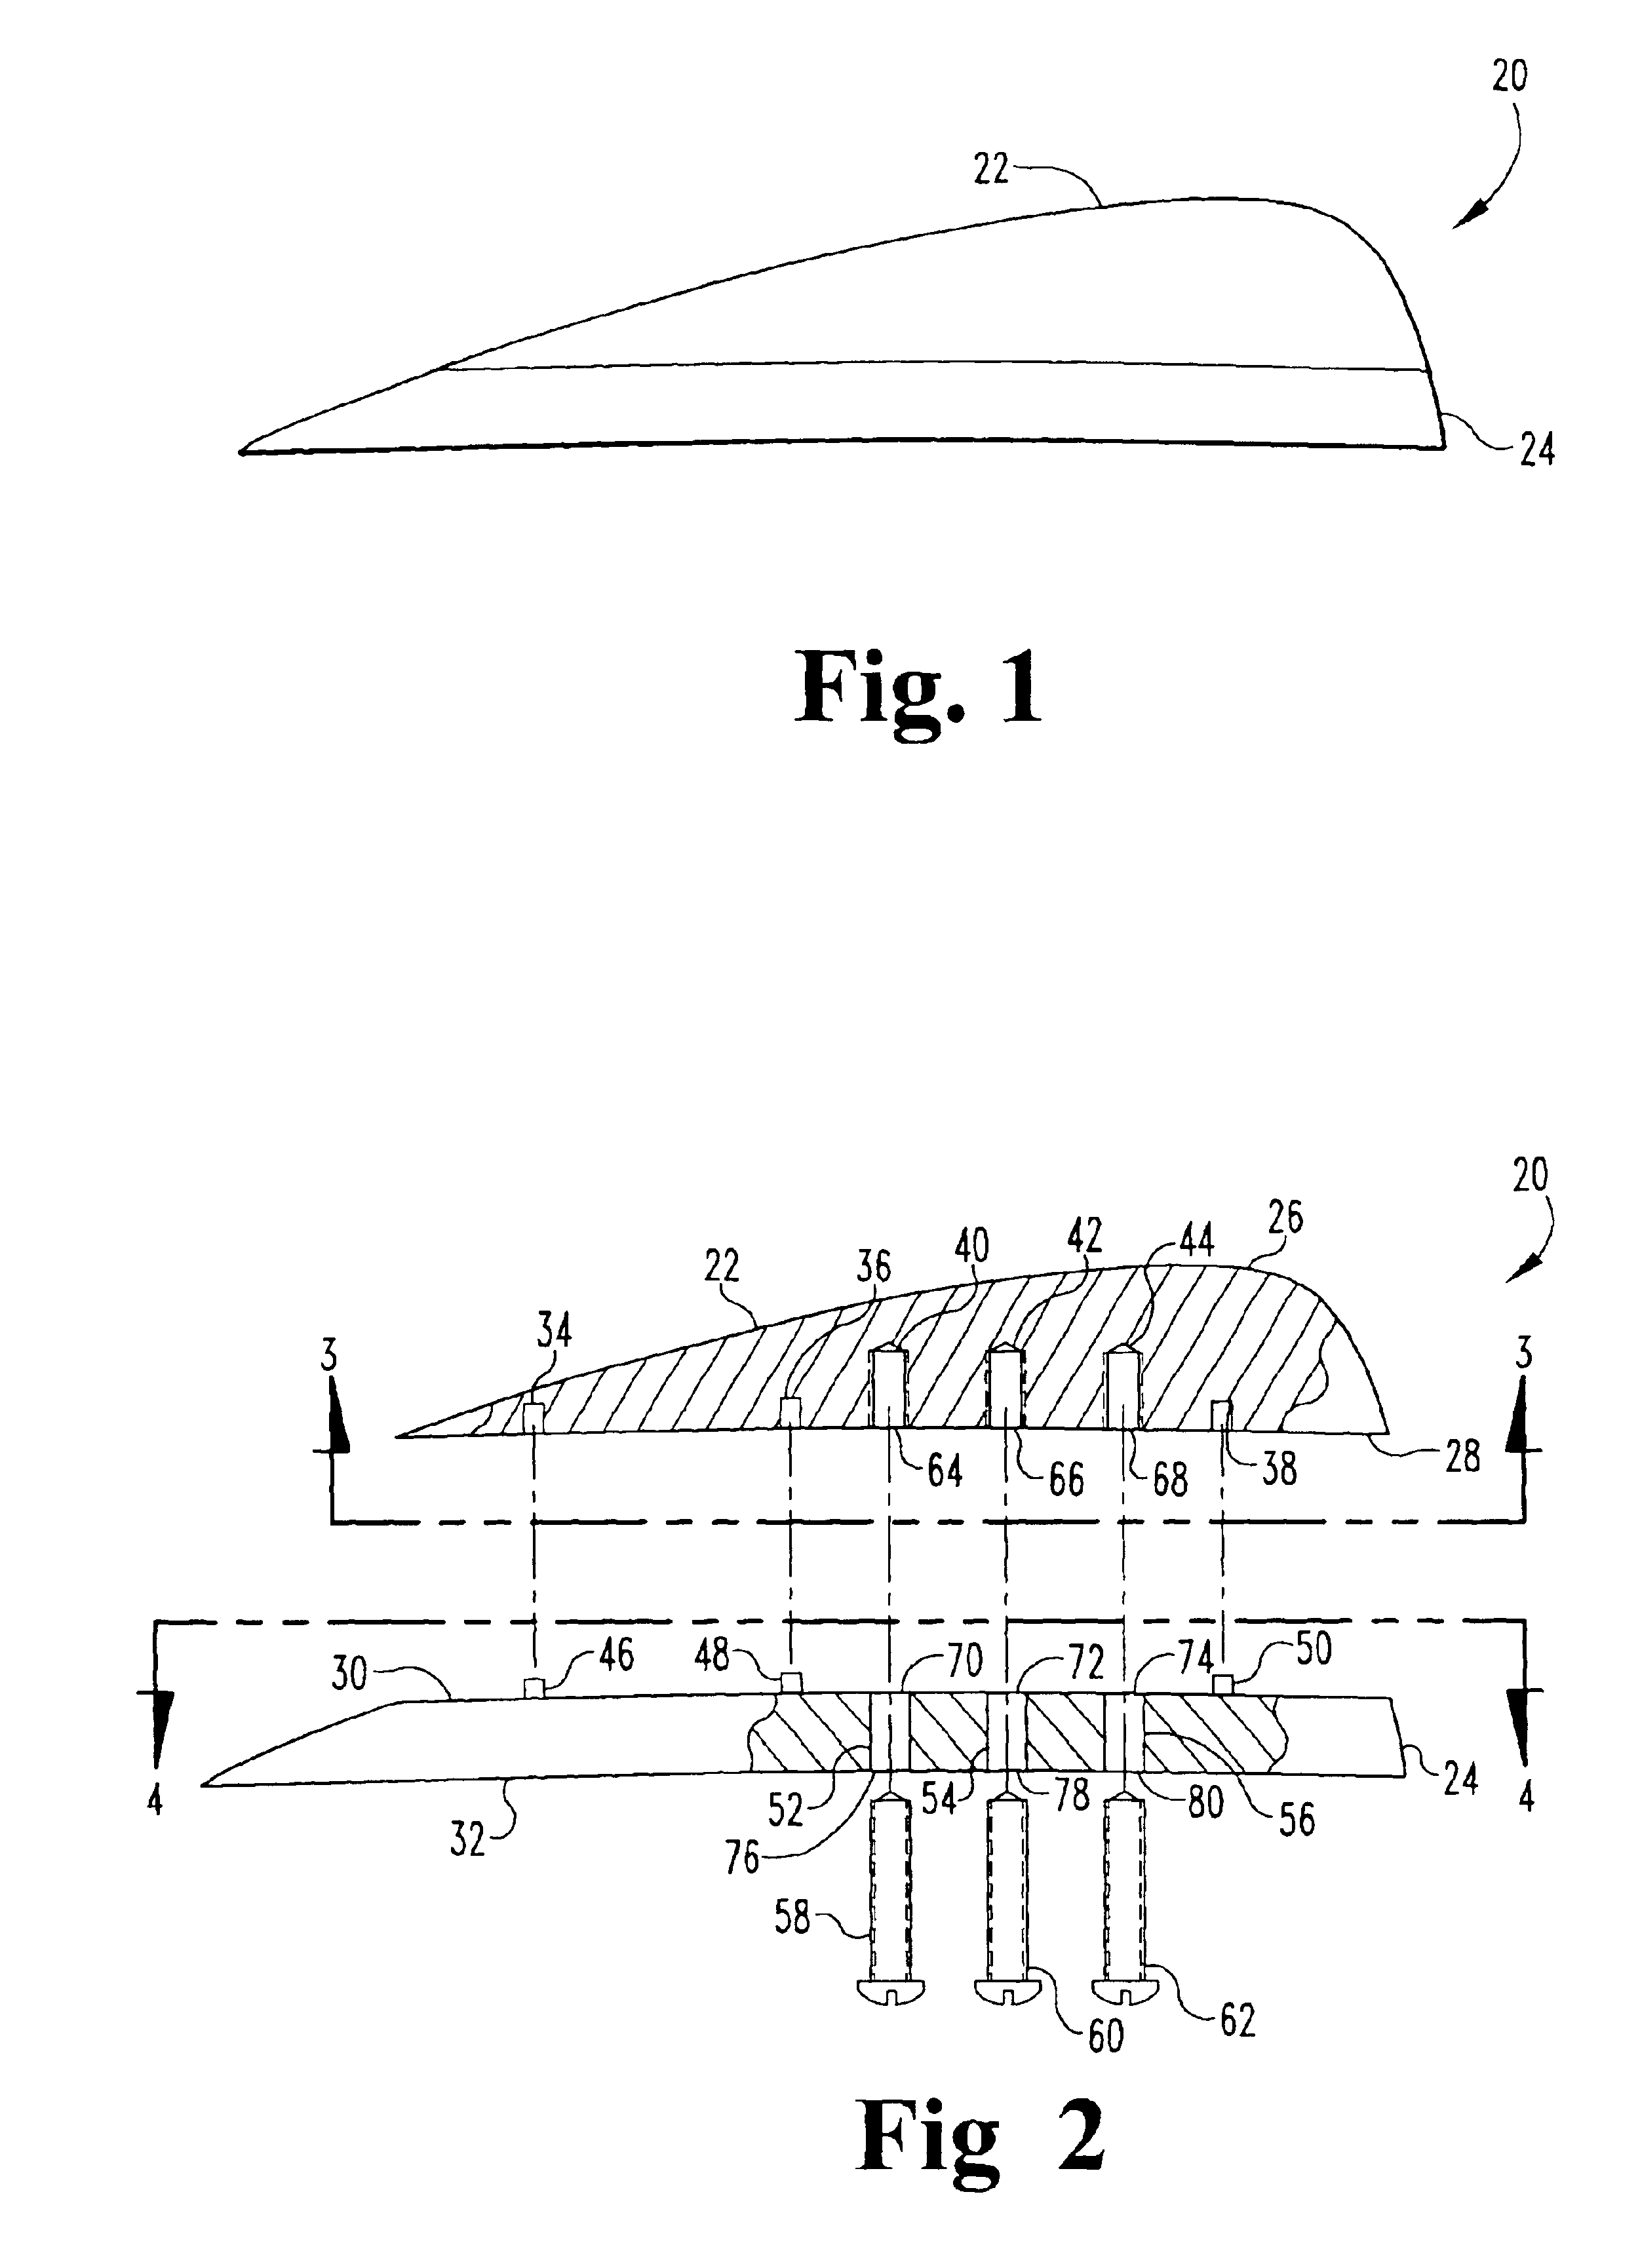 Watersport board fin assembly and methods of using same